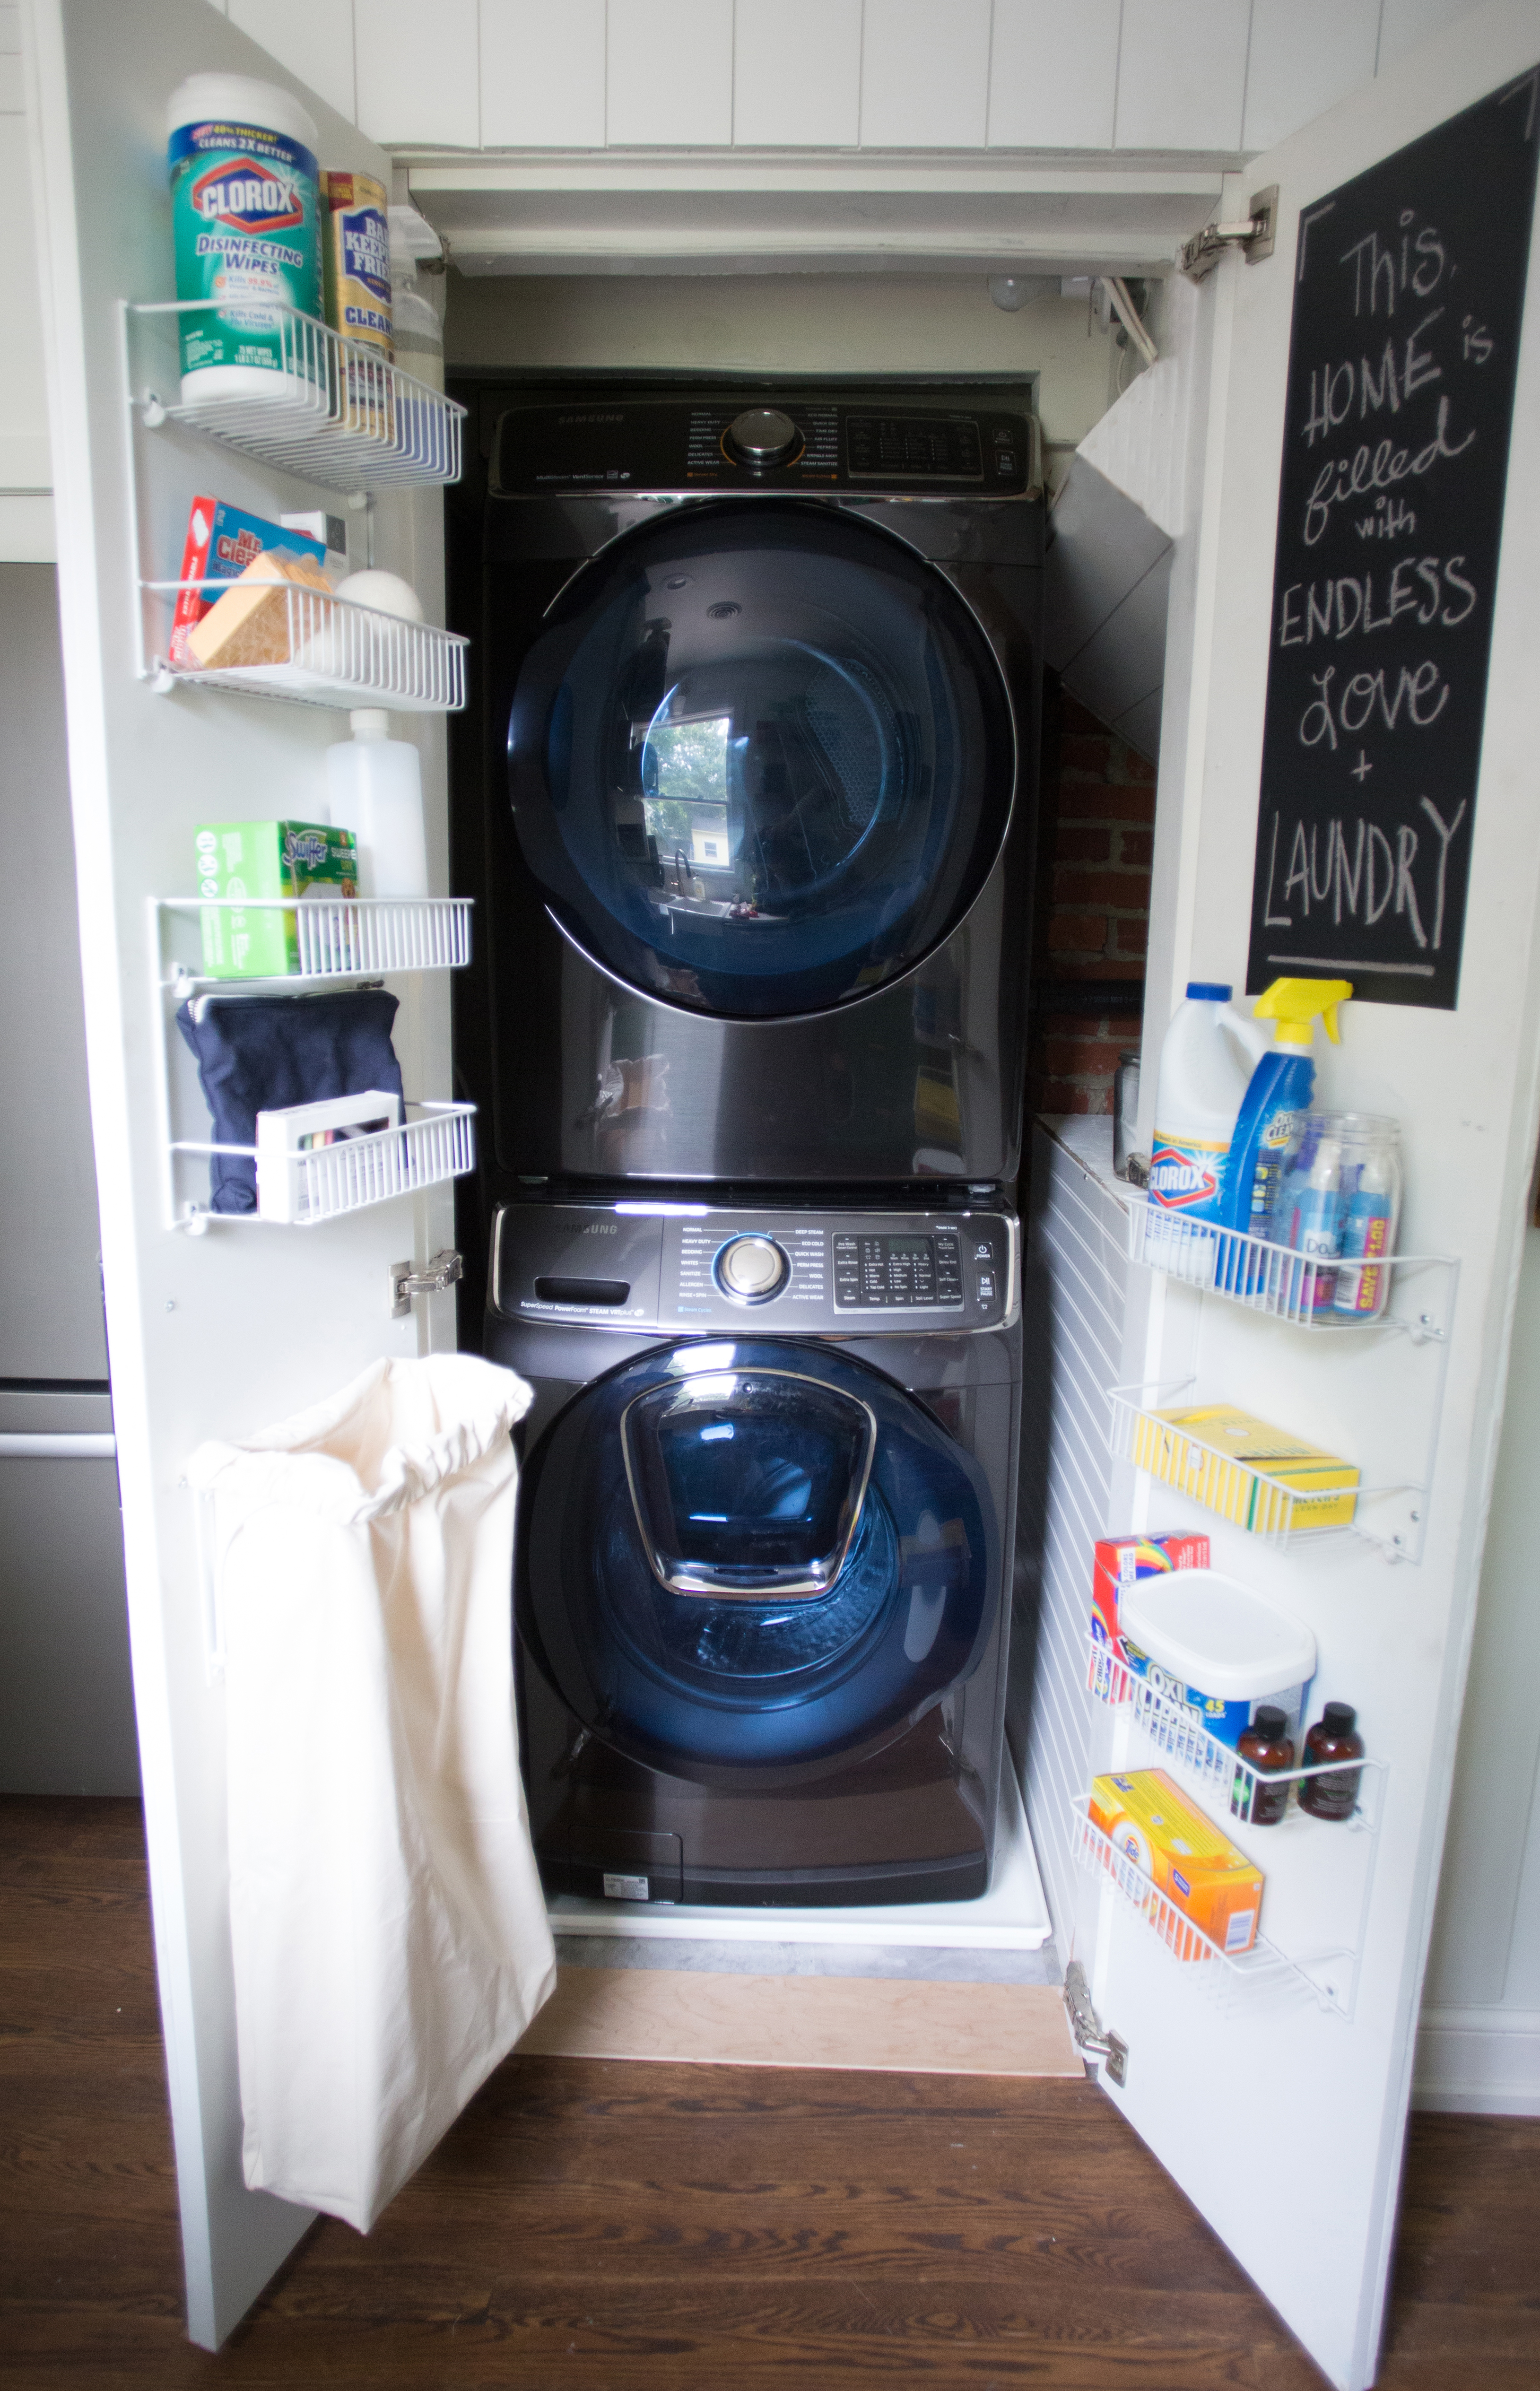 Find Out How to Make the Most of a Small Laundry Room